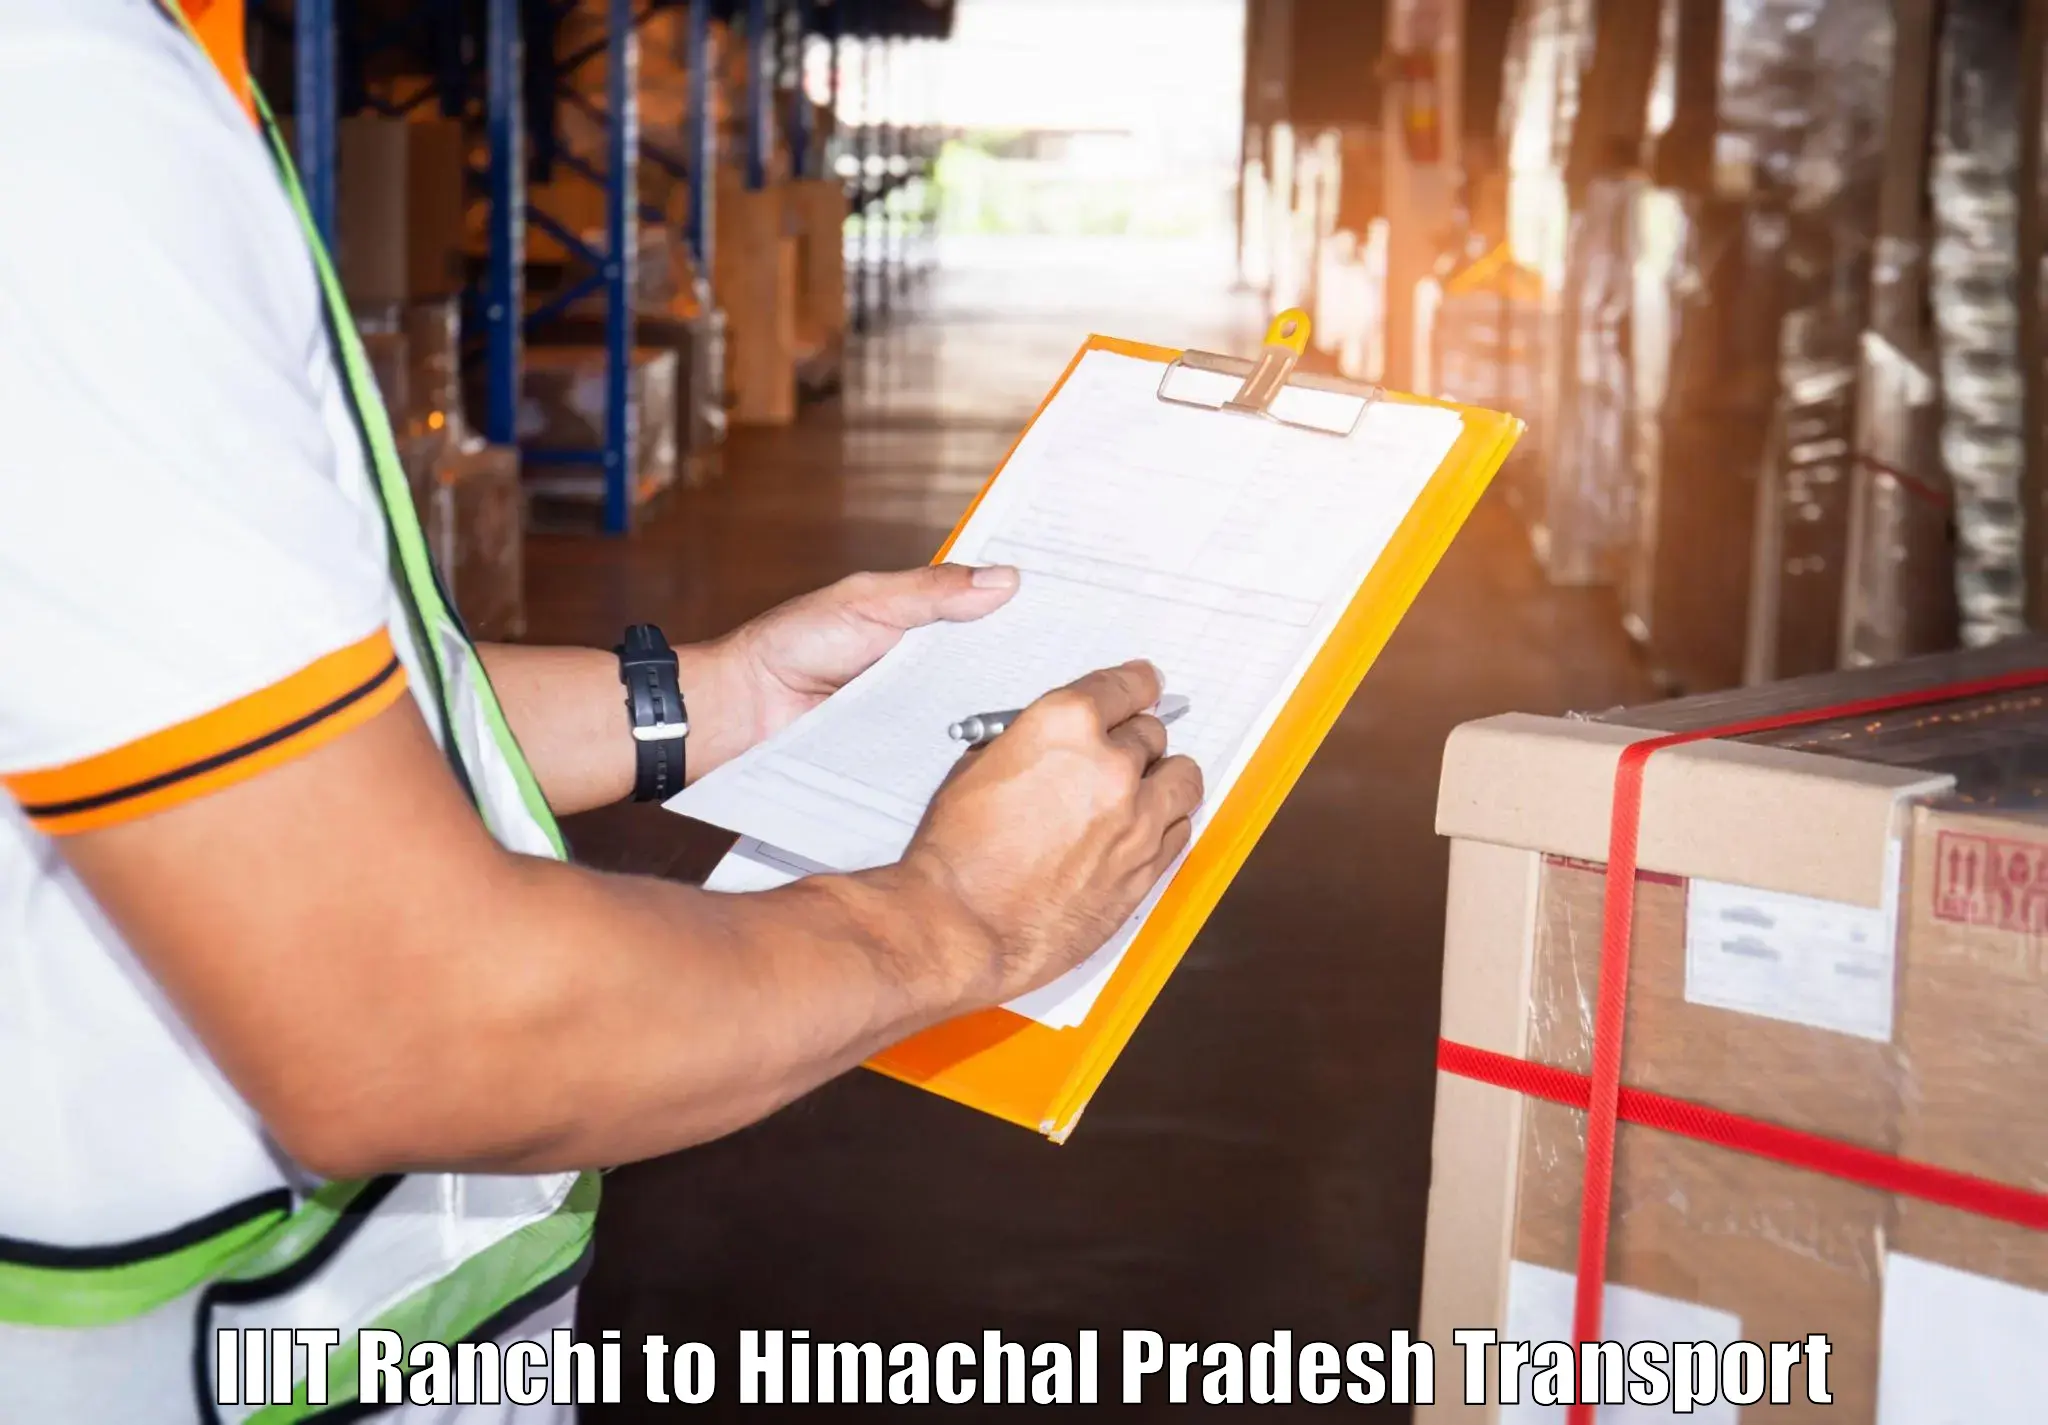 Commercial transport service IIIT Ranchi to Nalagarh